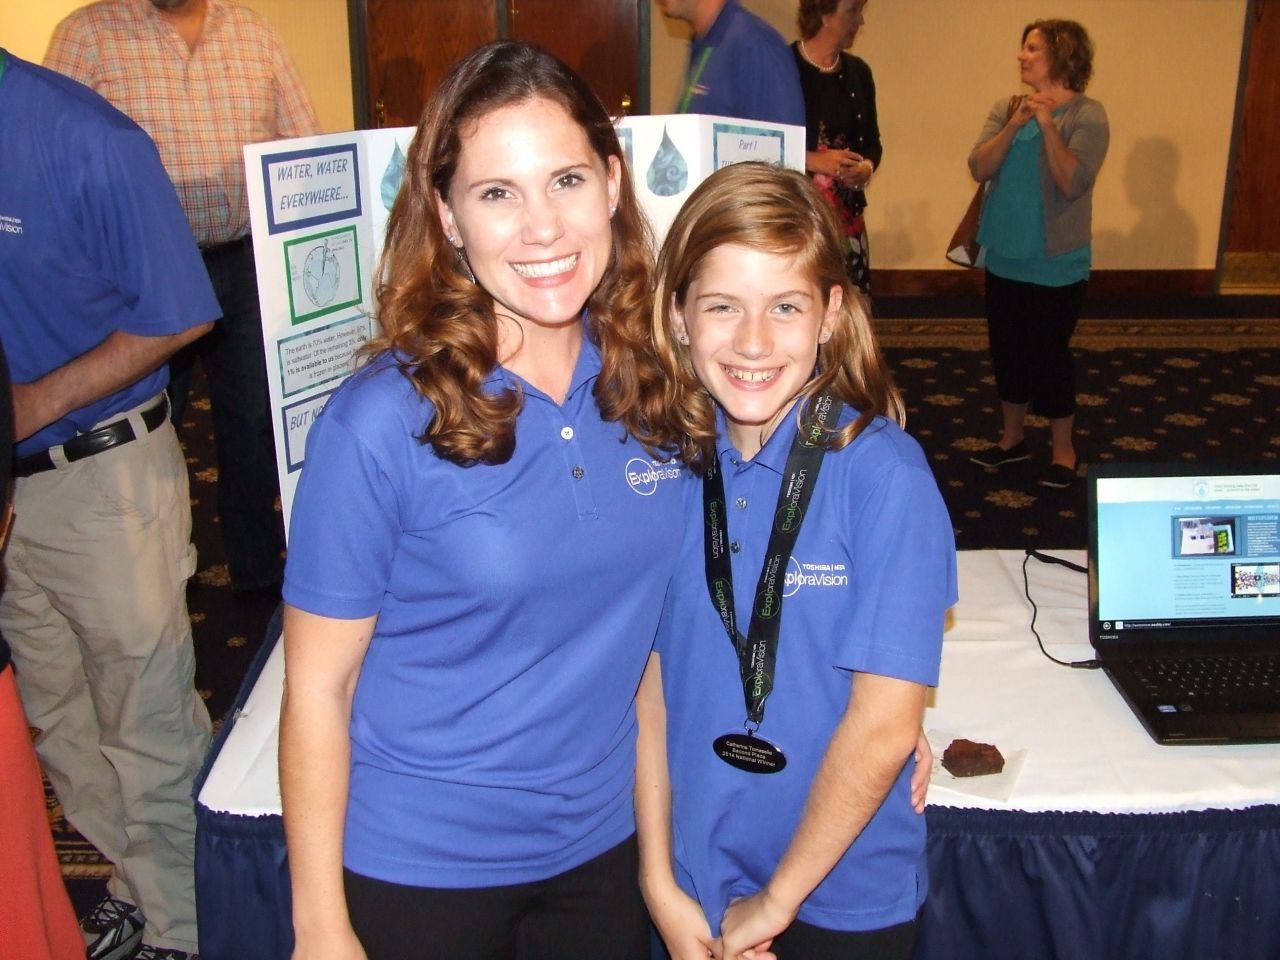 Tomasello and her daughter Catie stand in front of her display at the 2014<a href="http://www.exploravision.org/" target="_blank" target="_blank"> Exploravision awards </a>weekend. "Catie and her teammates have blown me away with their creativity and desire to use science and technology to help others, and to make the world a better place. Their projects have included an innovative medical device for people with allergies, clean energy for homes and communities, and environmentally friendly methods to desalinate water." <br /> <br /><br />"A 'proud mom' moment came this summer when Catie explained her team's winning idea, the WateRenew, to a room of over 200 at the National Press Club, packed with corporate officials from Toshiba, including the CEO, educators, scientists, and members of the press. The scientist who created the Wave Wing prototype offered Catie and her teammates each a job upon college graduation with a degree in a science field. Catie is in sixth grade now, but she already has a job waiting for her!" 